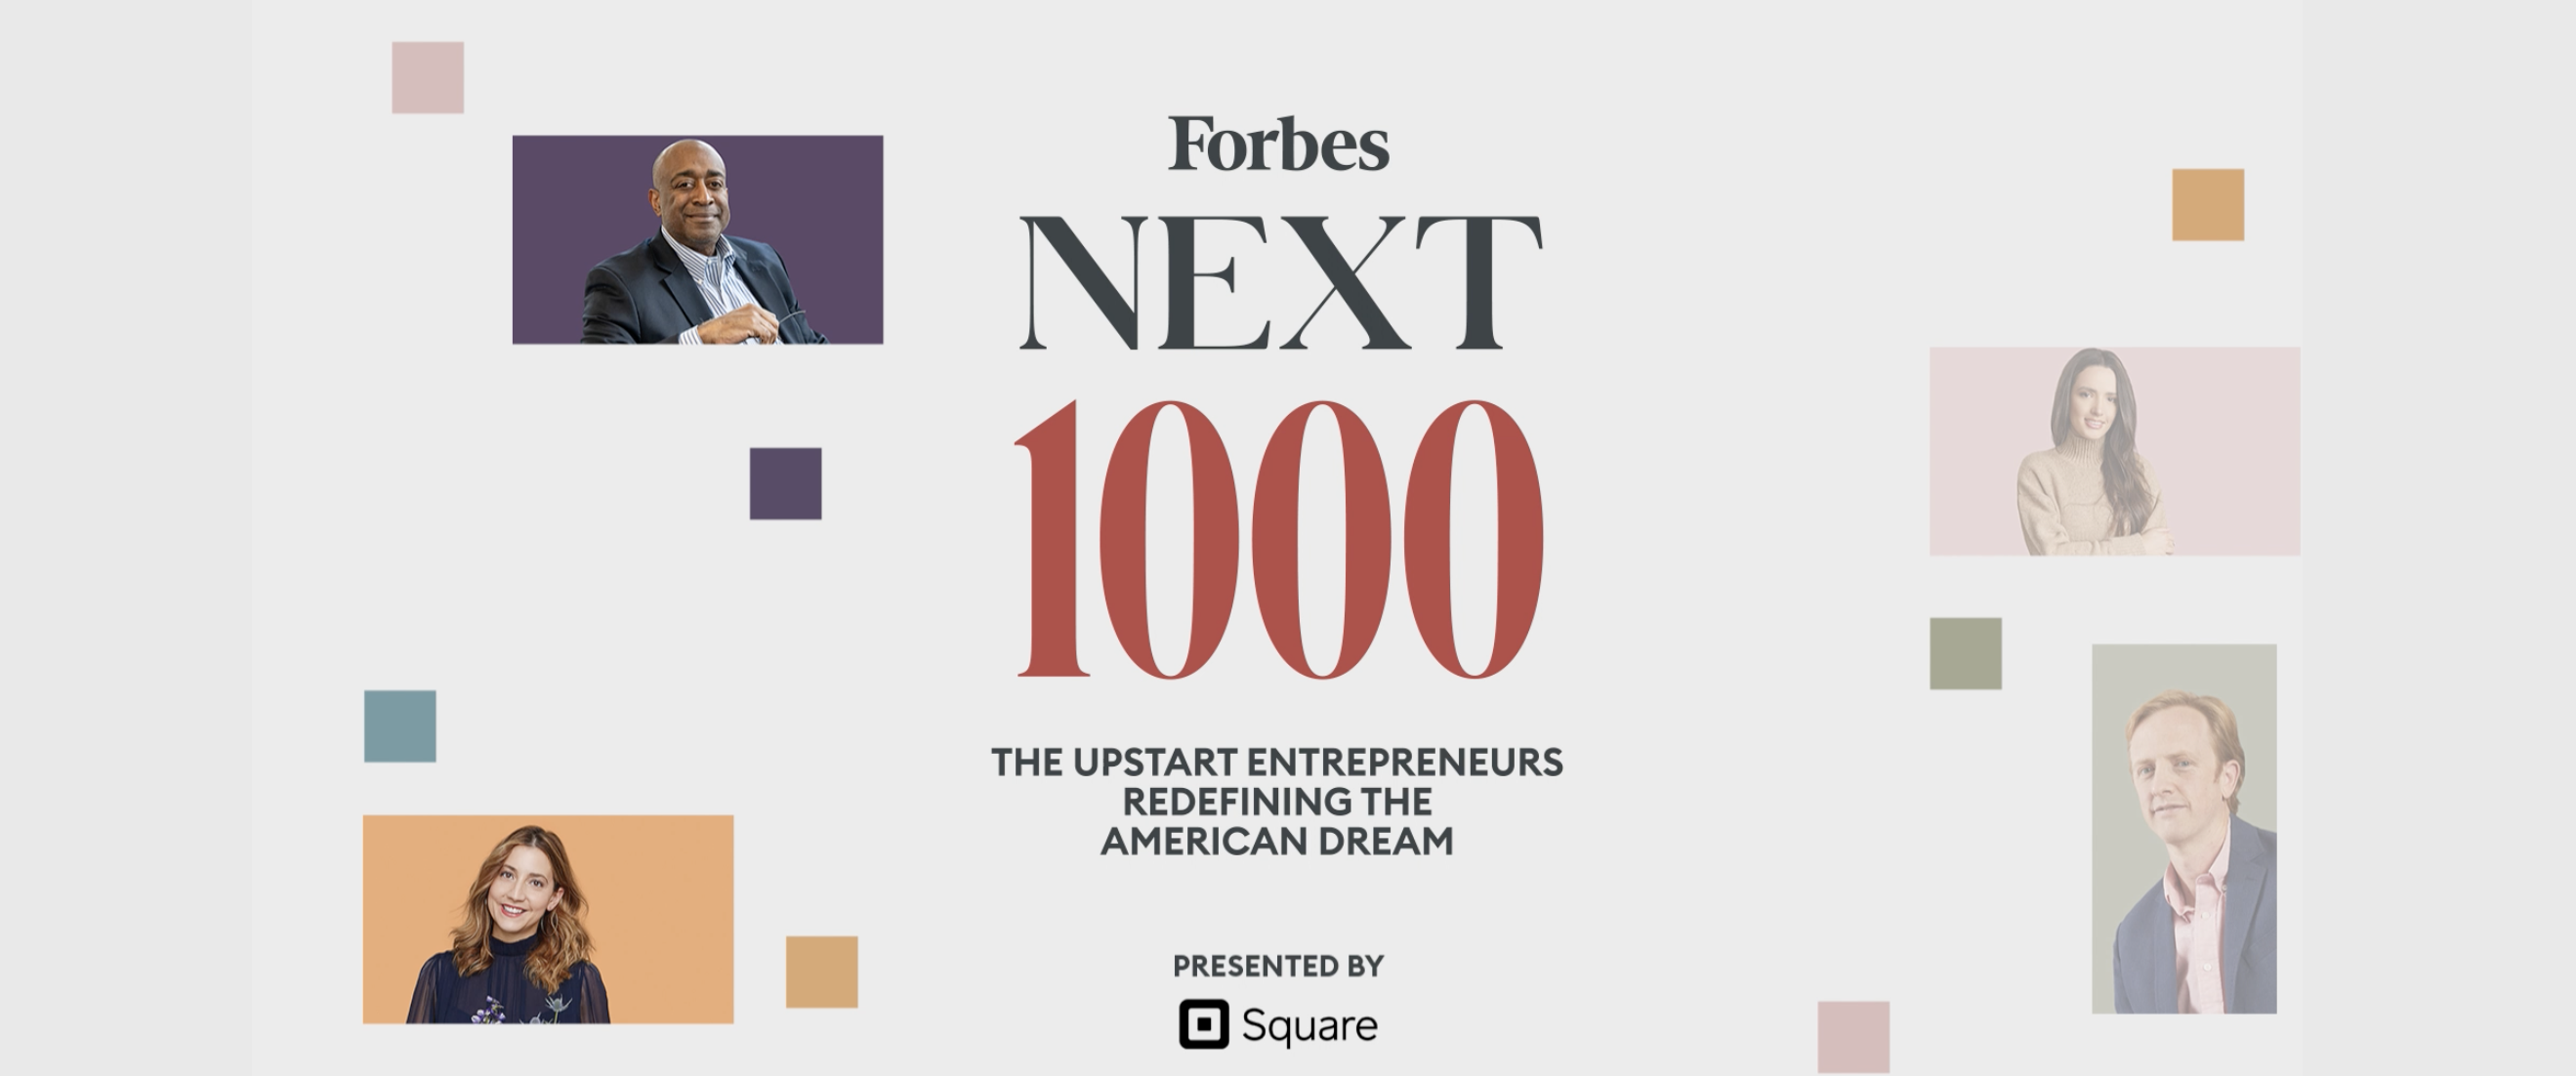 MaC Venture Capital Founders Featured on the Forbes Next 1000 2021